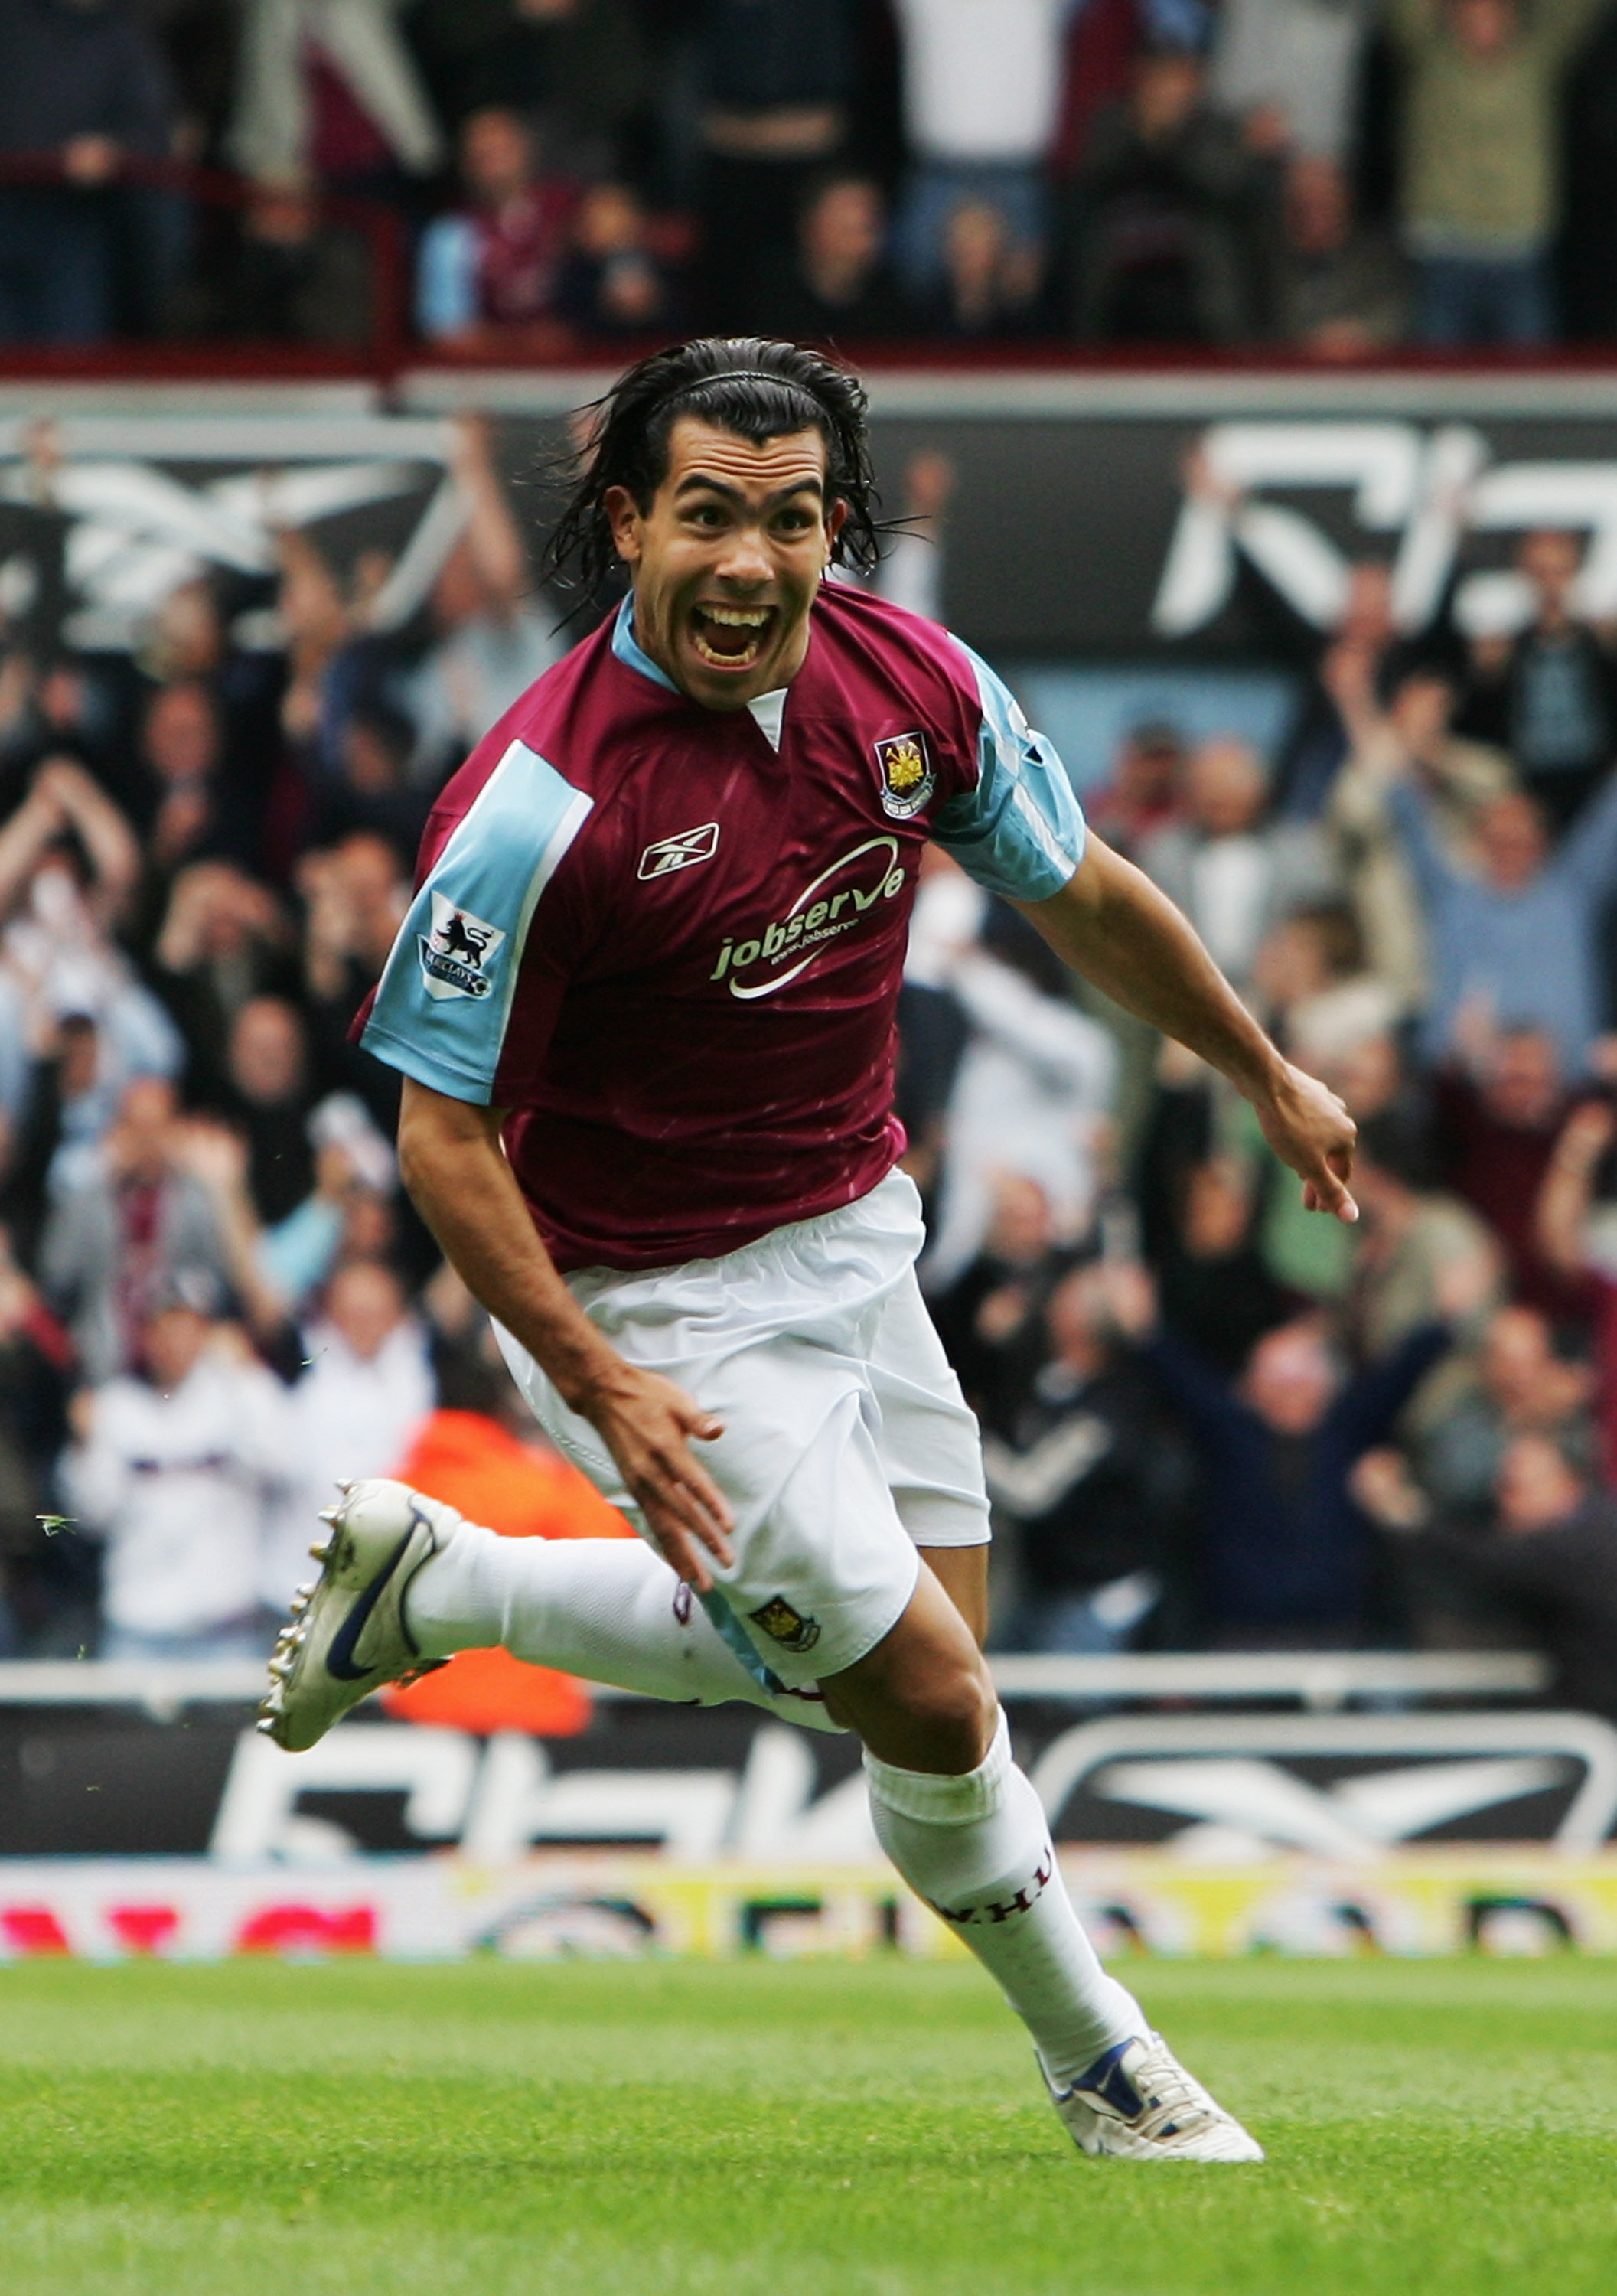 LONDON - MAY 05:  Carlos Tevez of West Ham United celebrates scoring during the Barclays Premiership match between West Ham United and Bolton Wanderers at Upton Park on May 5, 2007 in London, England.  (Photo by Chris Lee/Getty Images)